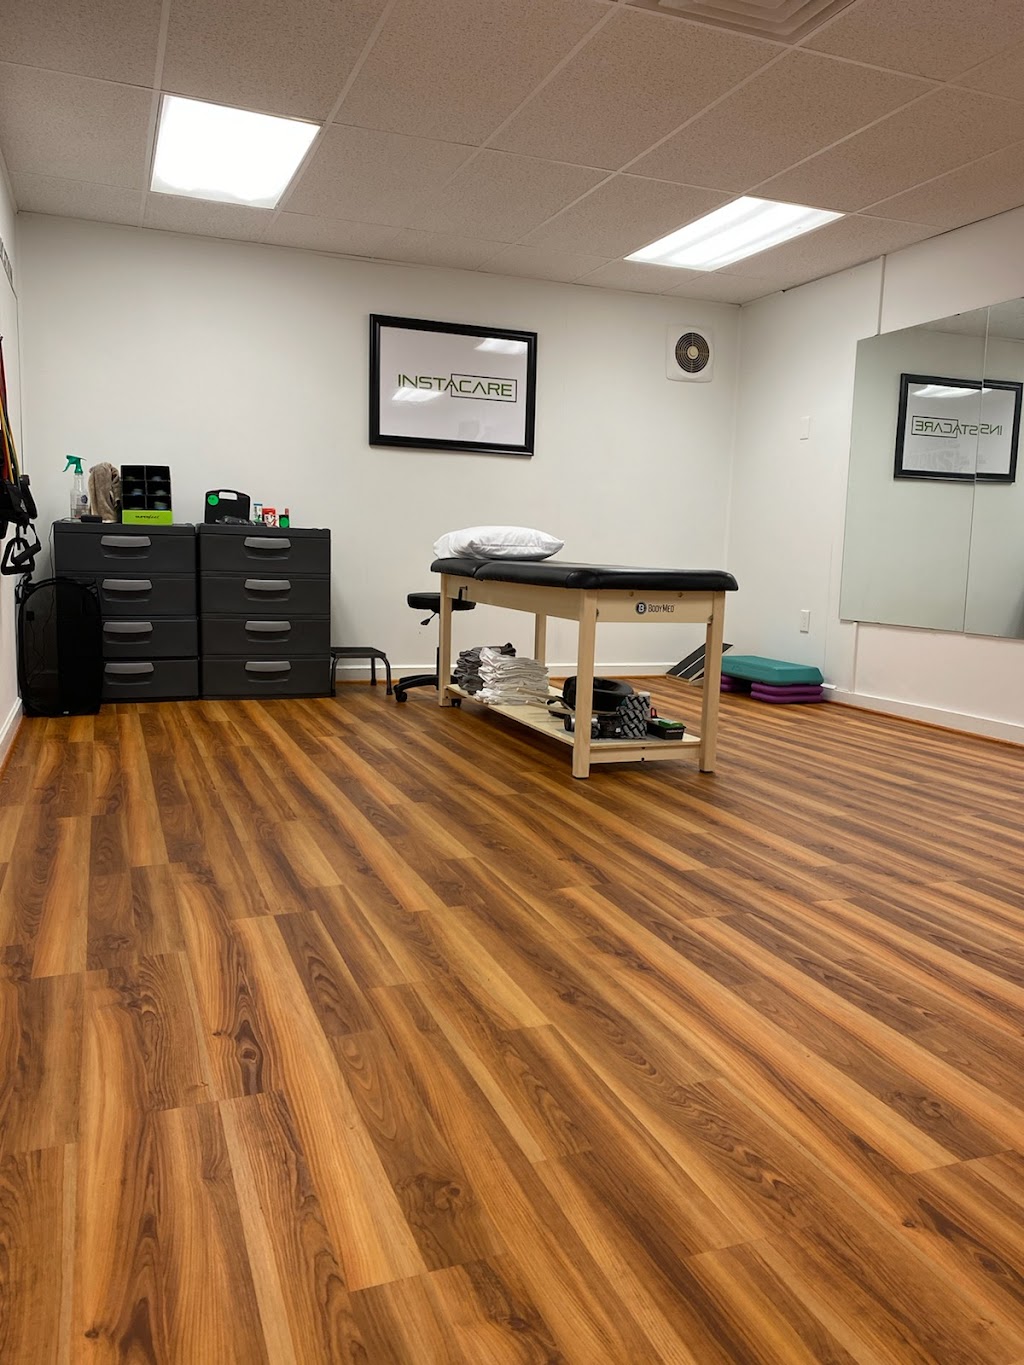 InstaCare Physical Therapy | 56 Penn Oaks Dr, West Chester, PA 19382 | Phone: (484) 202-0461